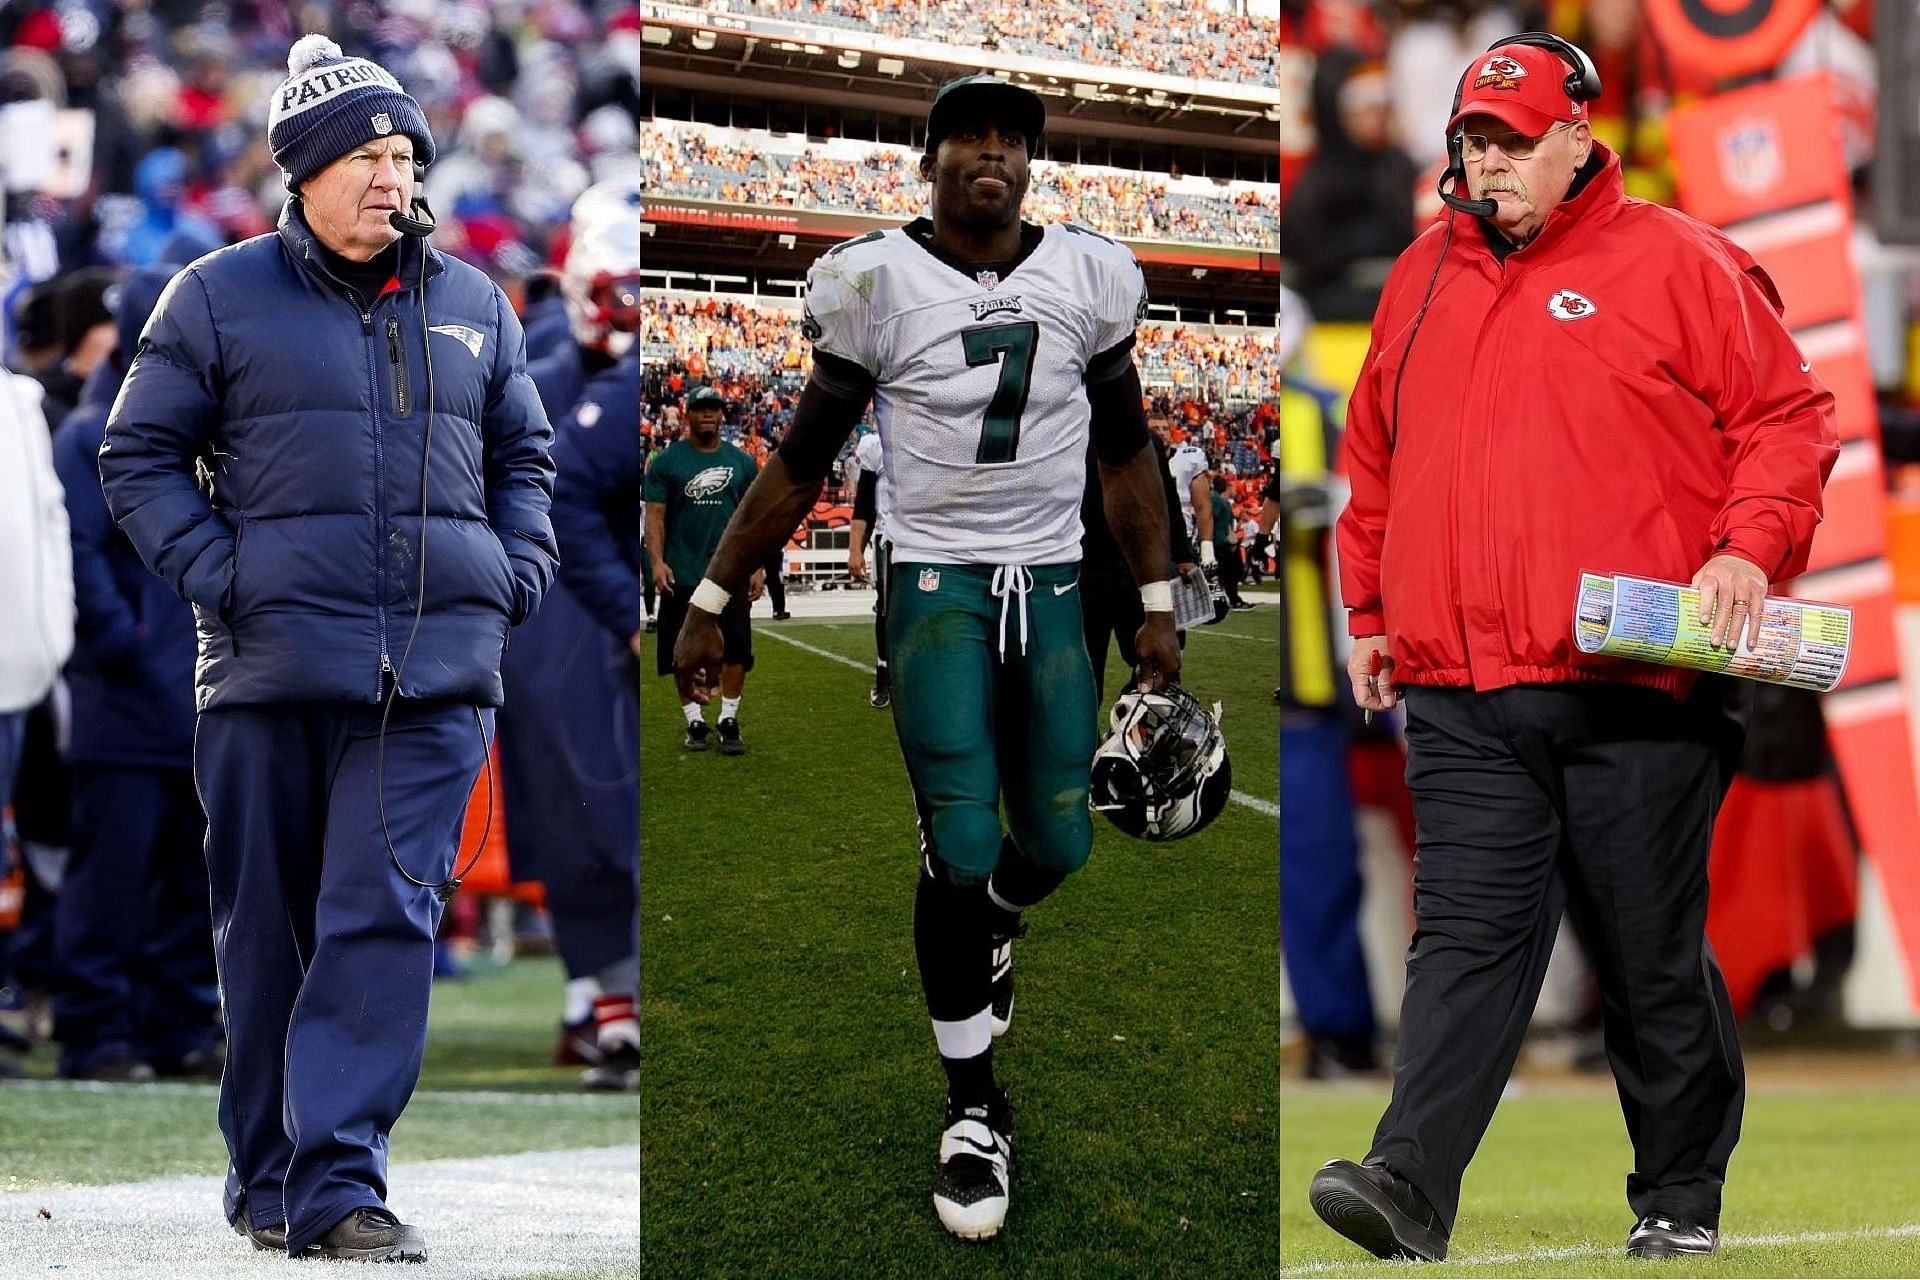 Michael Vick bats for Andy Reid as greatest coach over Bill Belichick